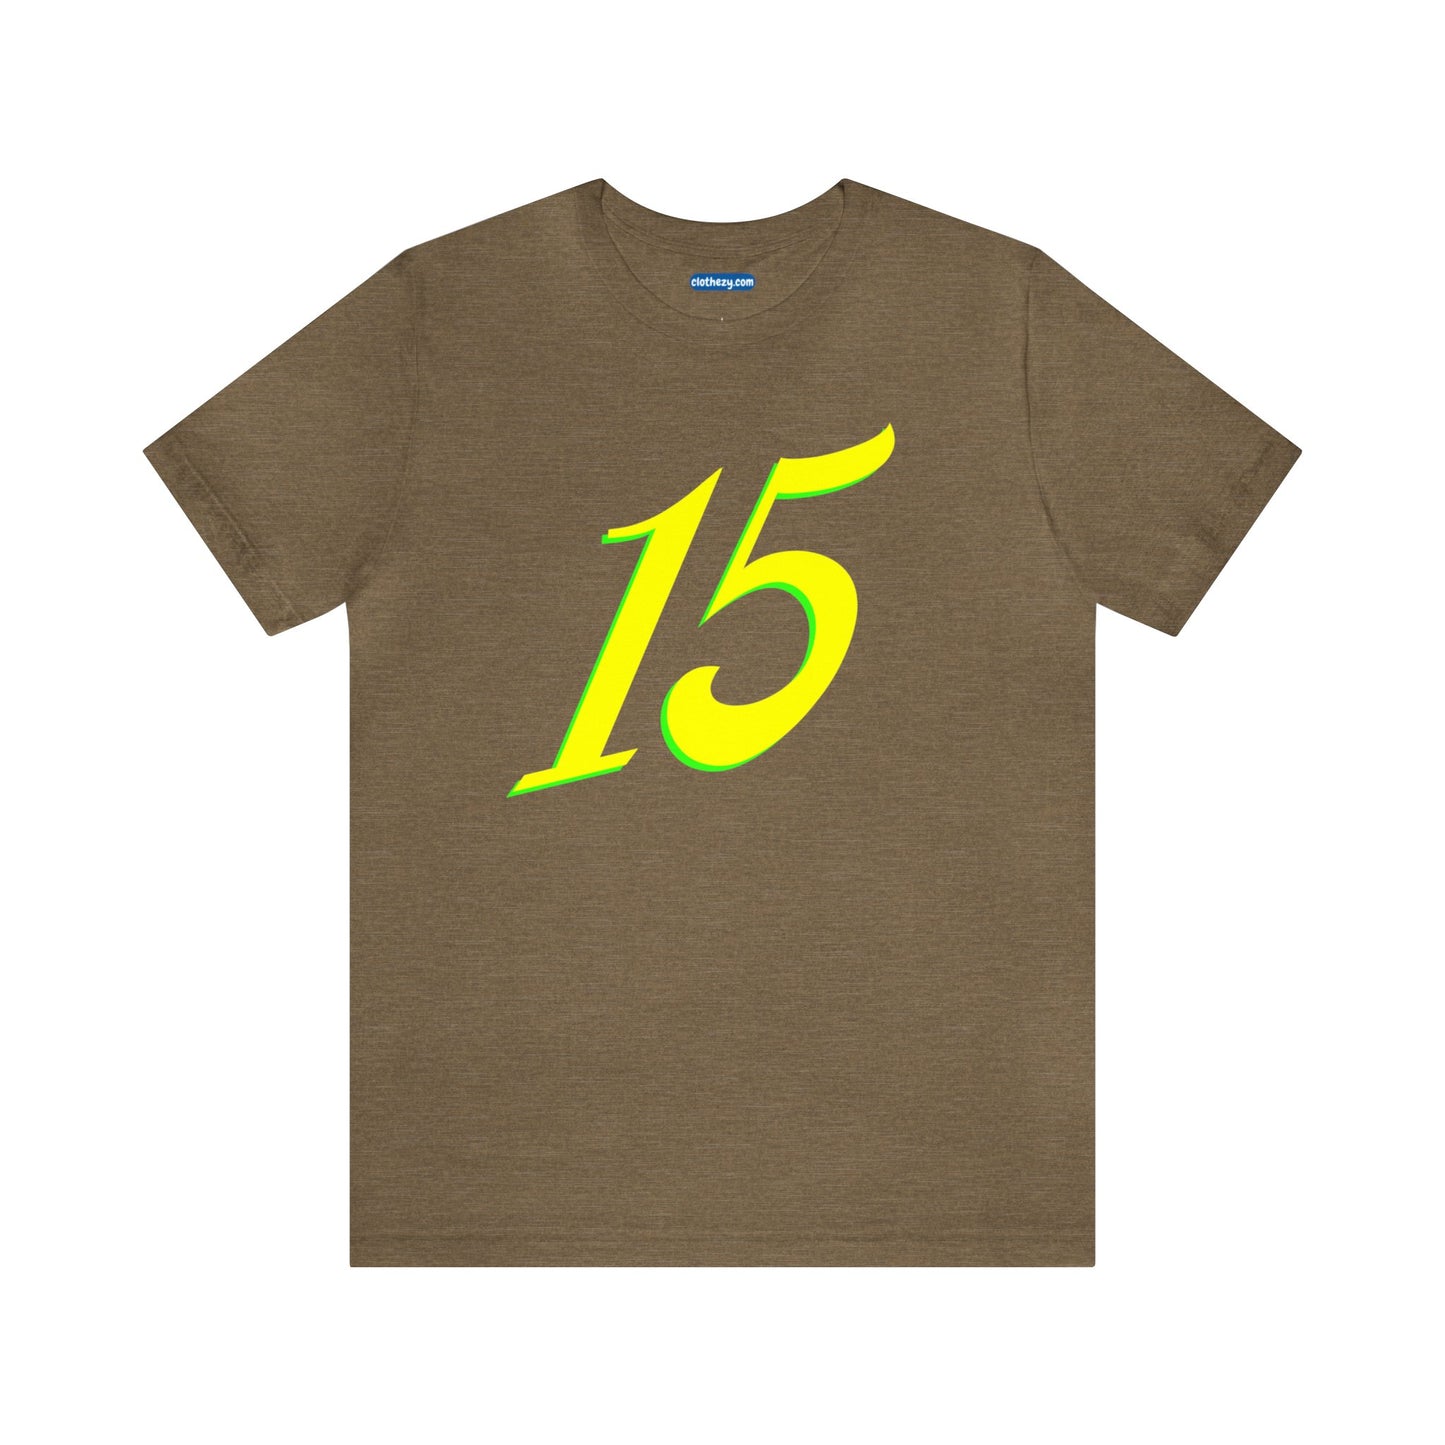 Number 15 Design - Soft Cotton Tee for birthdays and celebrations, Gift for friends and family, Multiple Options by clothezy.com in Olive Heather Size Small - Buy Now